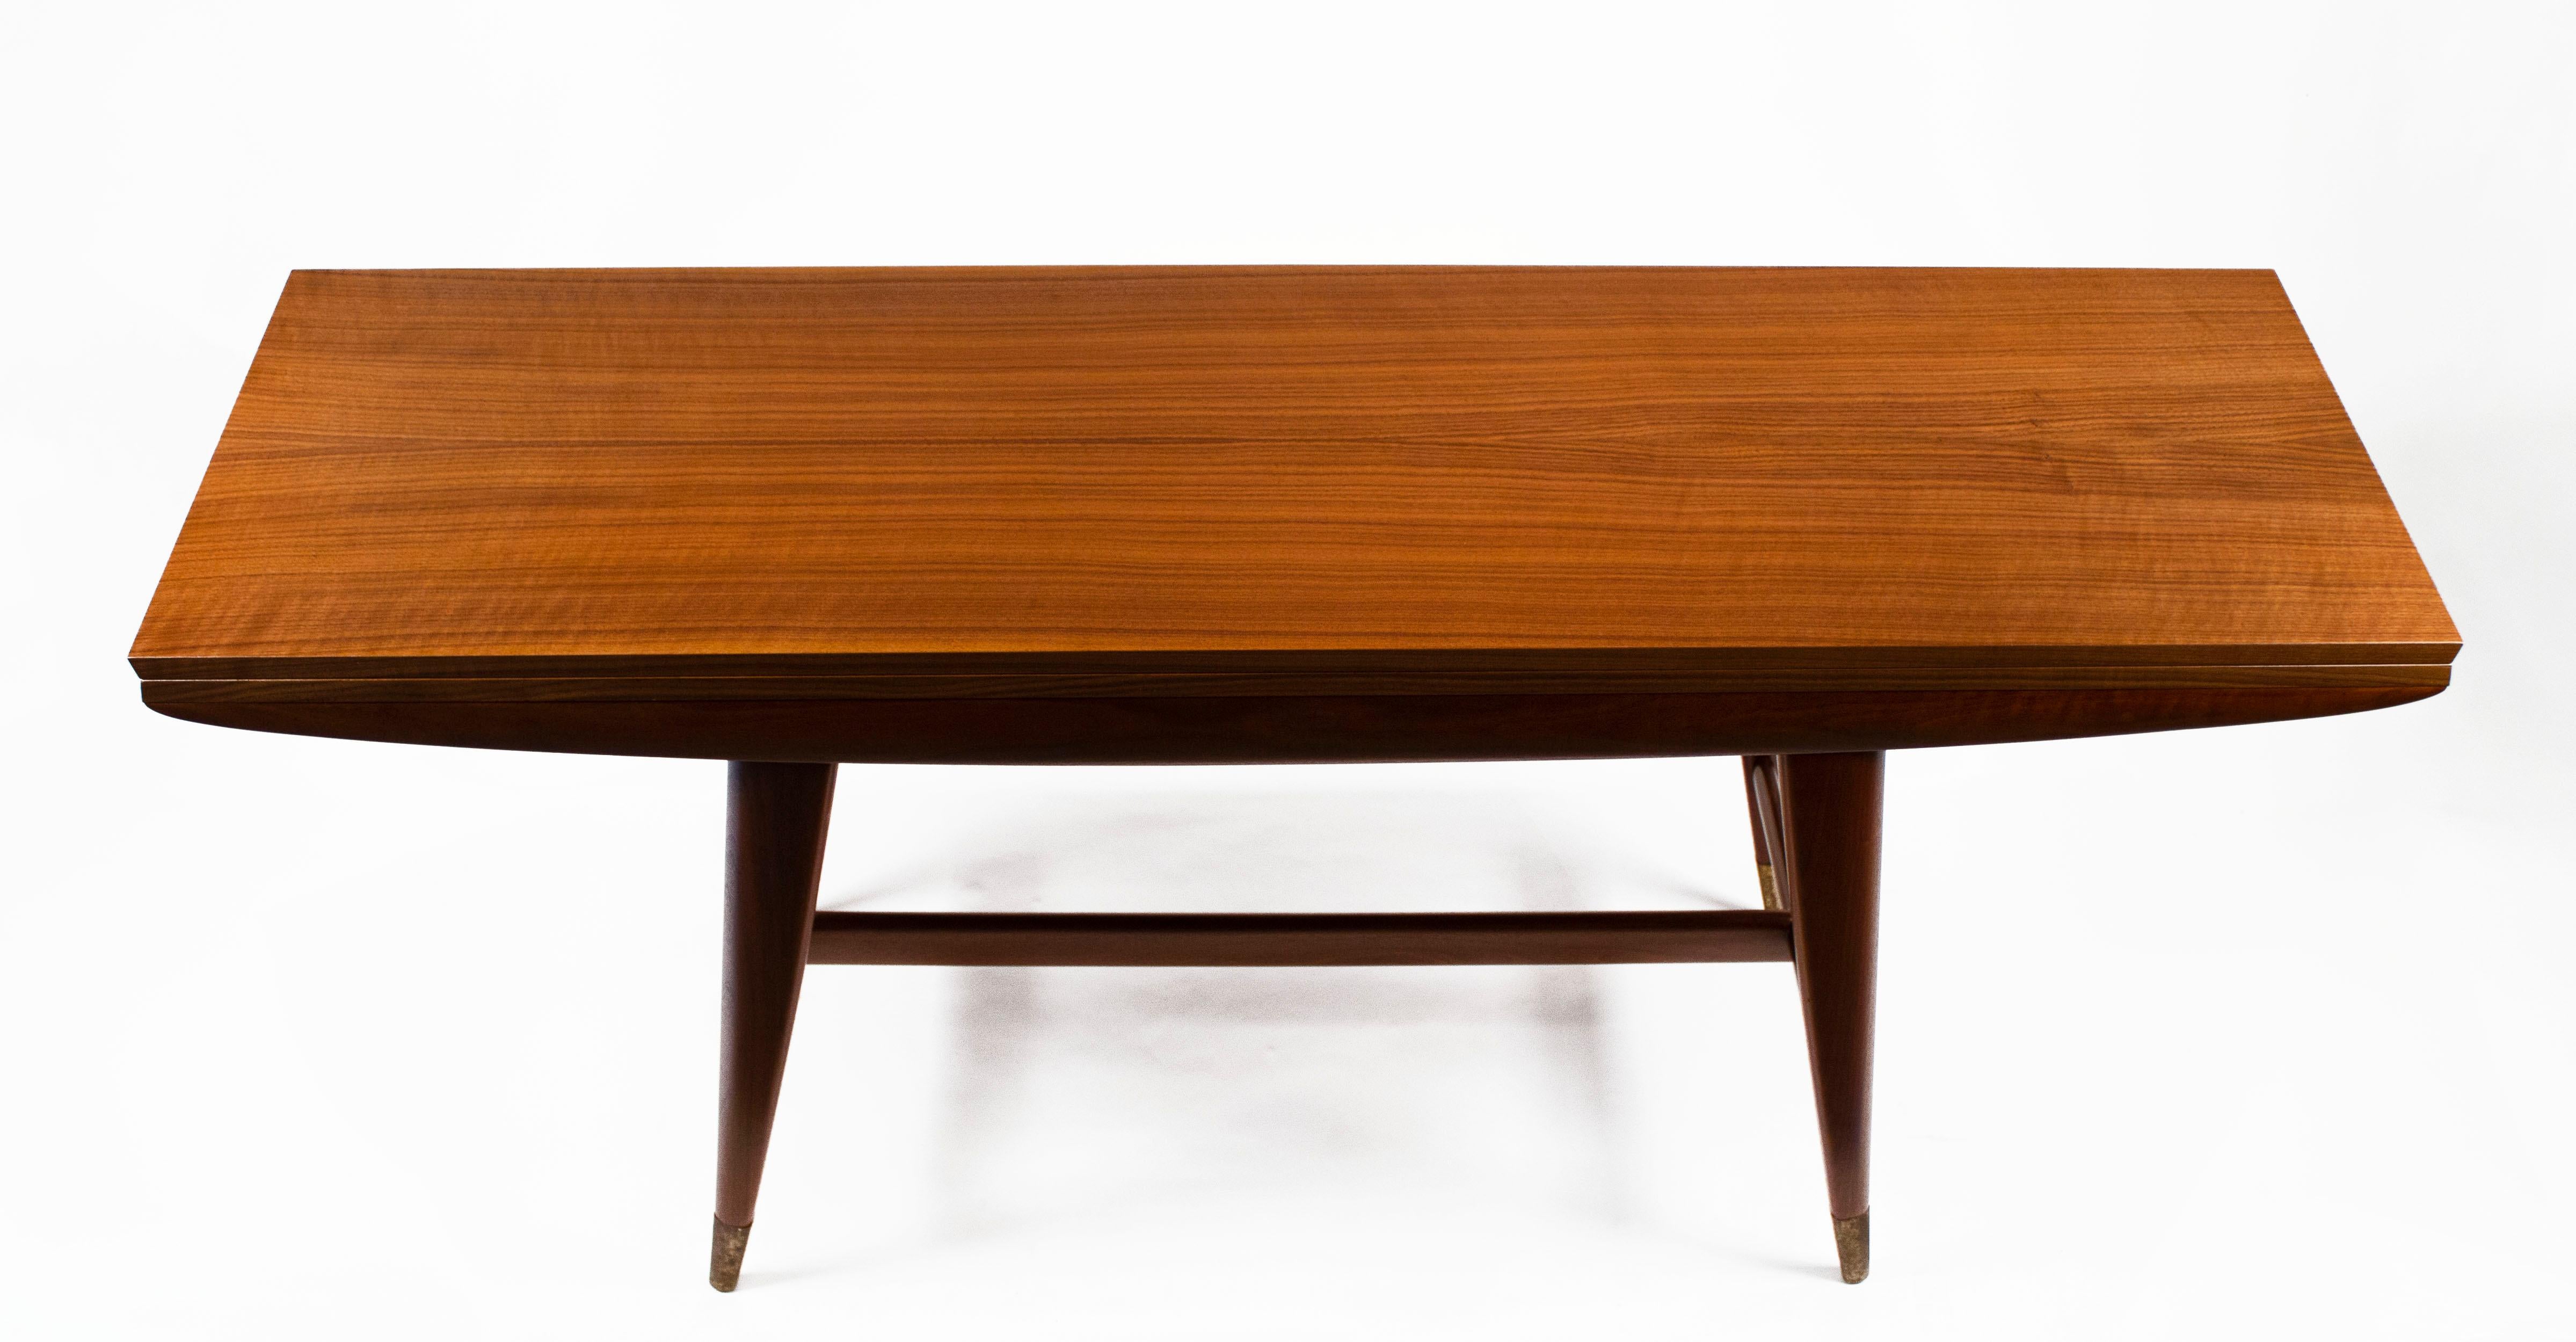 Gio Ponti Convertible Console / Dining Table for M. Singer & Sons in Walnut 1950 1